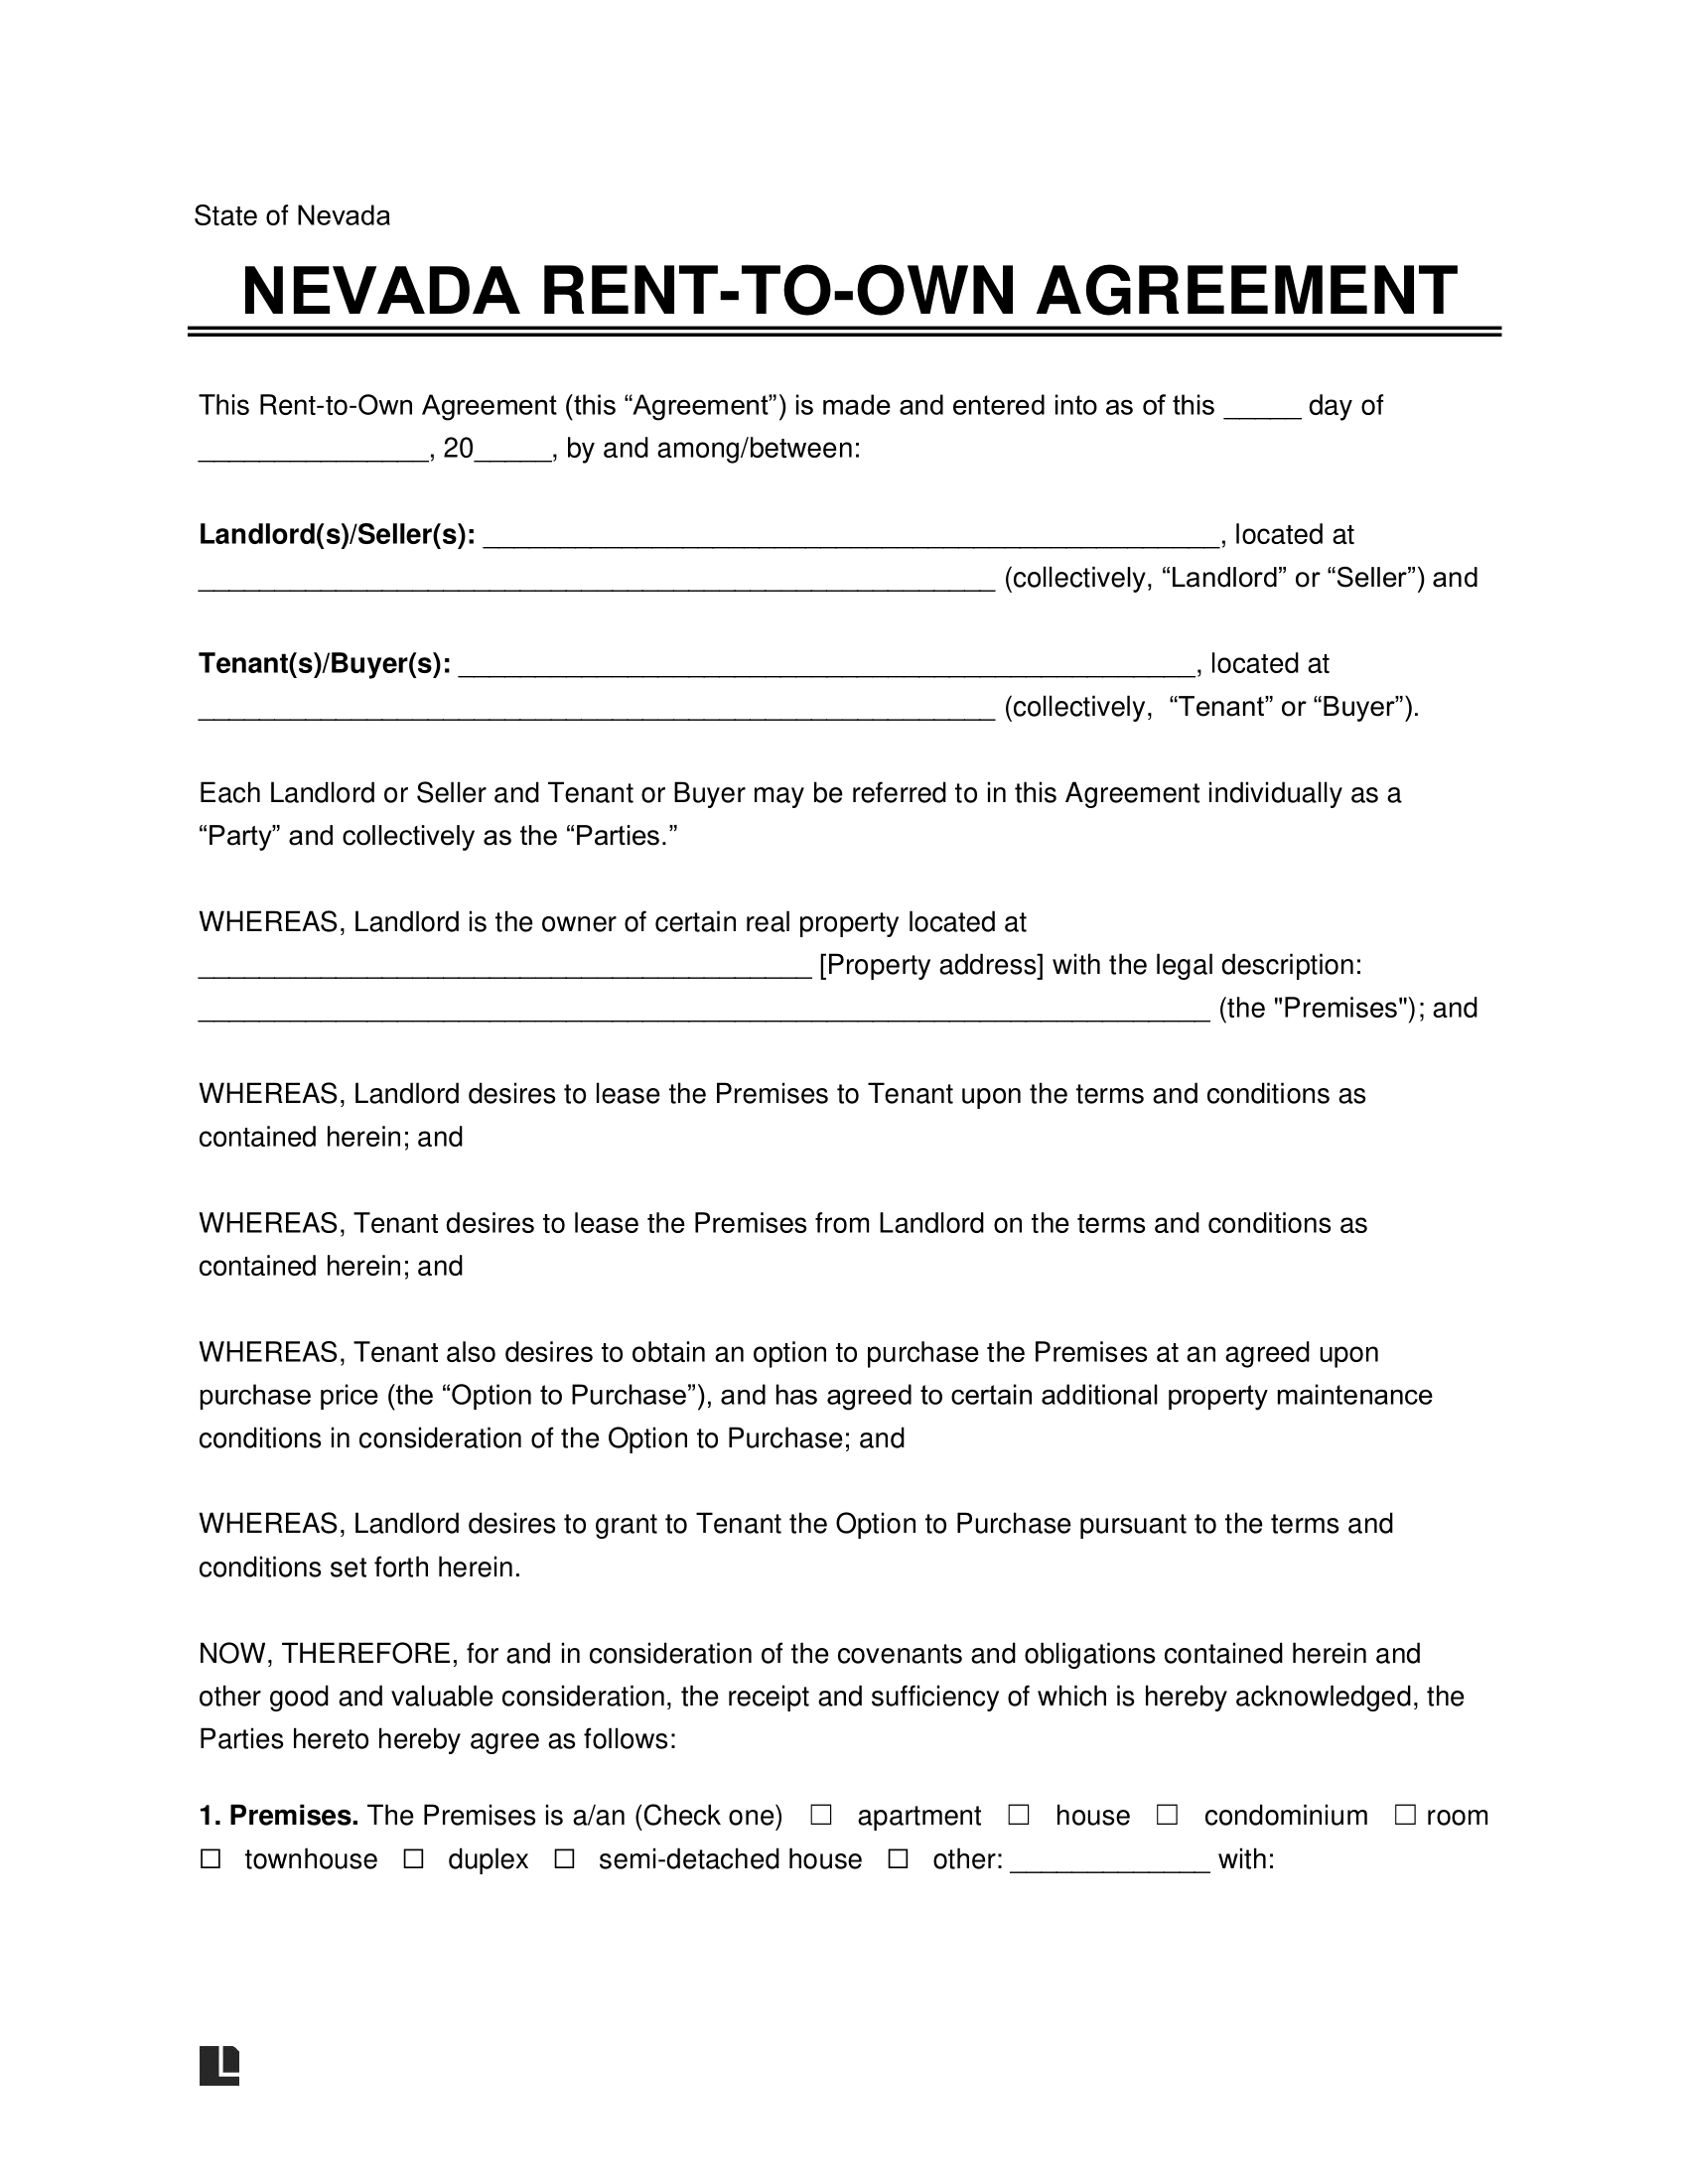 Nevada Lease-to-Own Option-to-Purchase Agreement